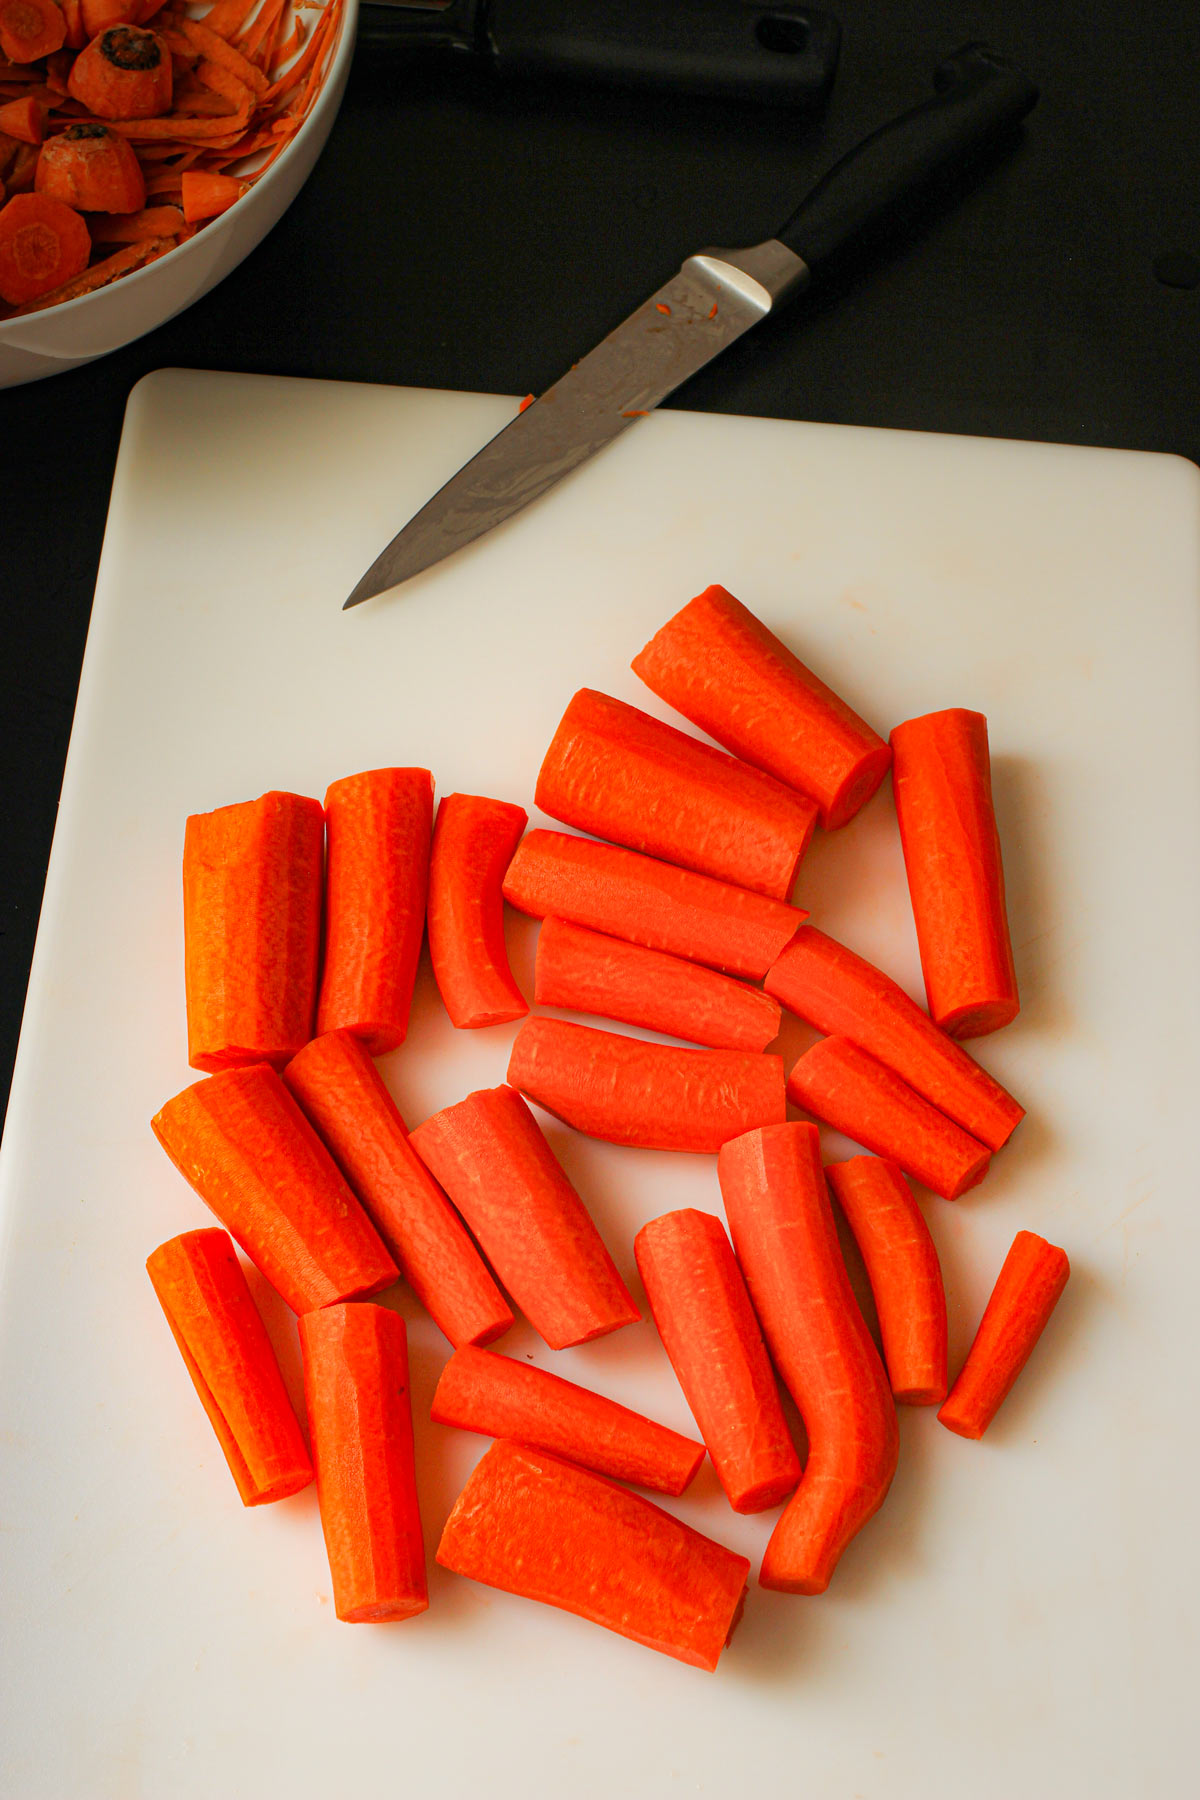 cutting the carrots into stick-length chunks.